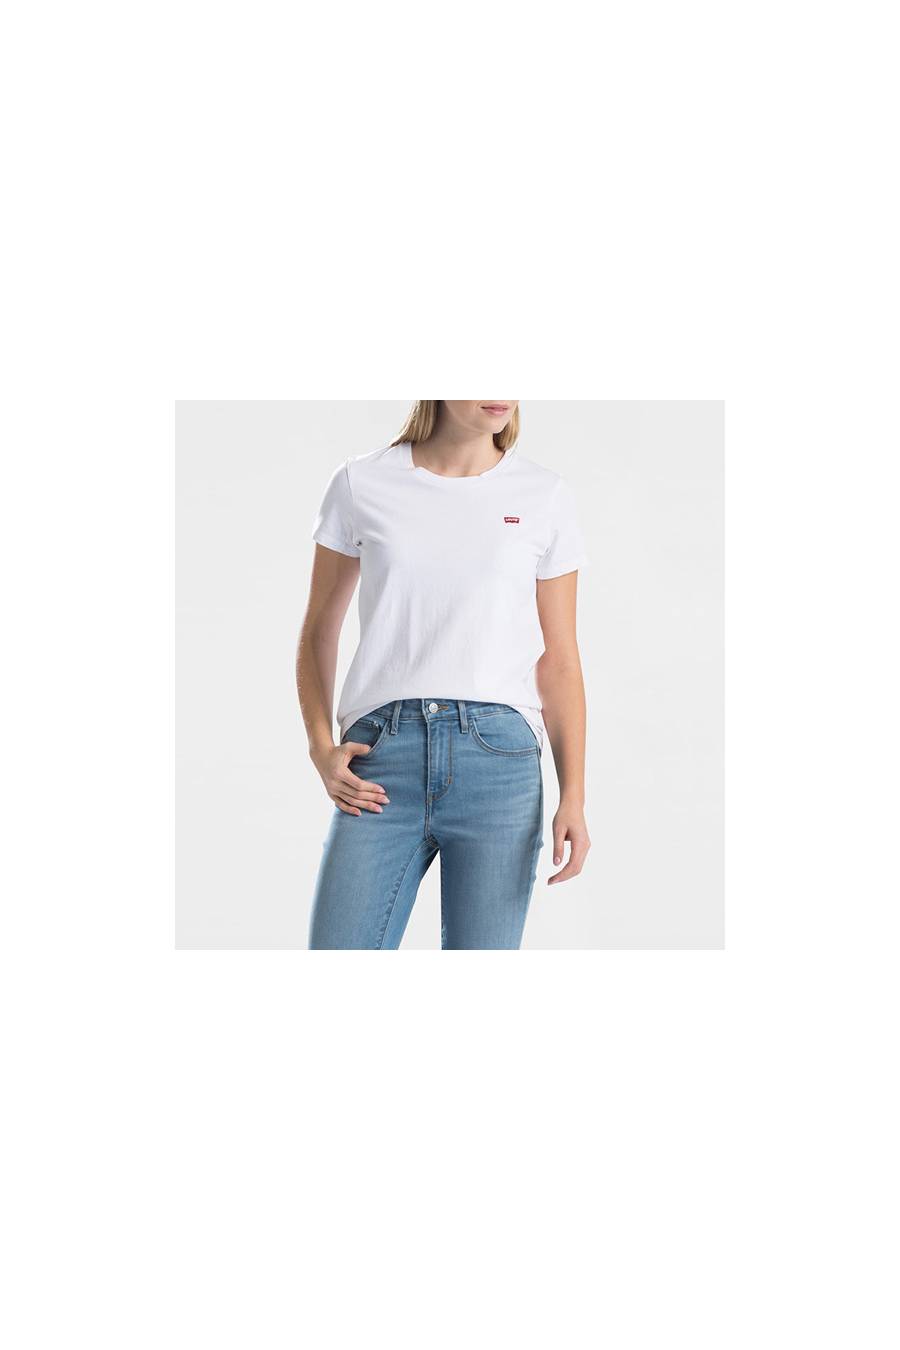 Levi's Perfect Tee mujer 39185-0006 msdsport